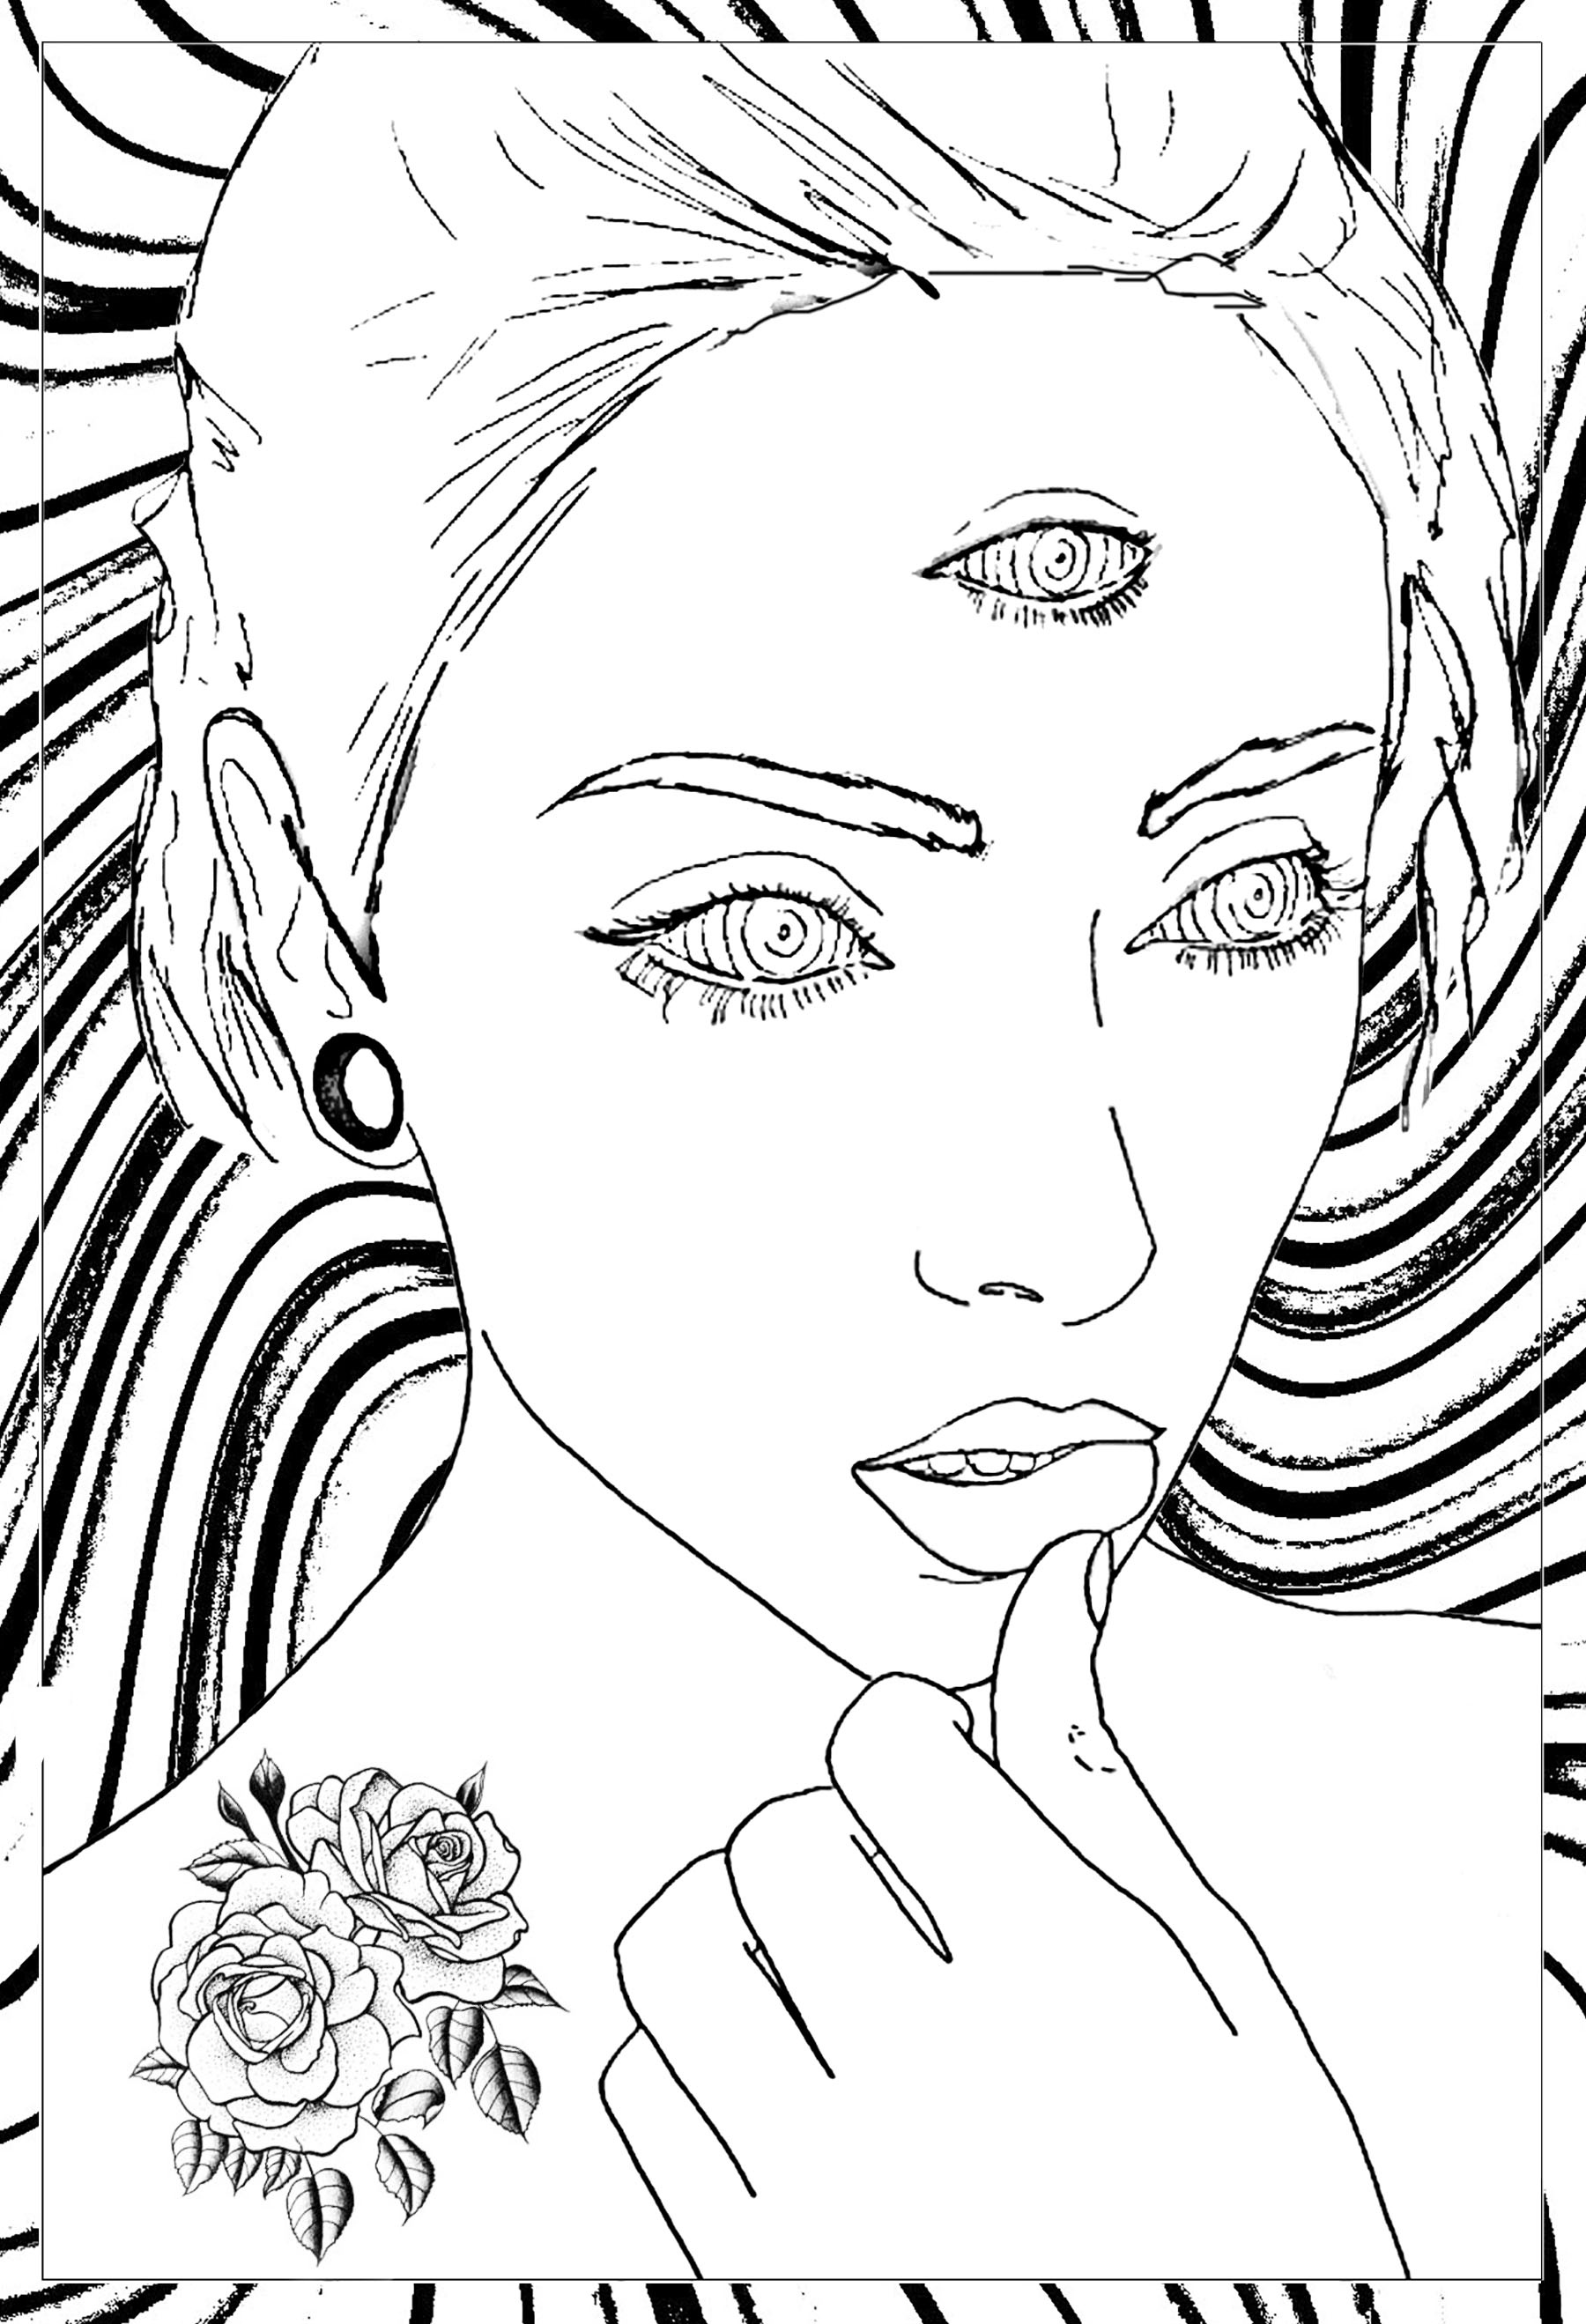 easy adult coloring pages printable